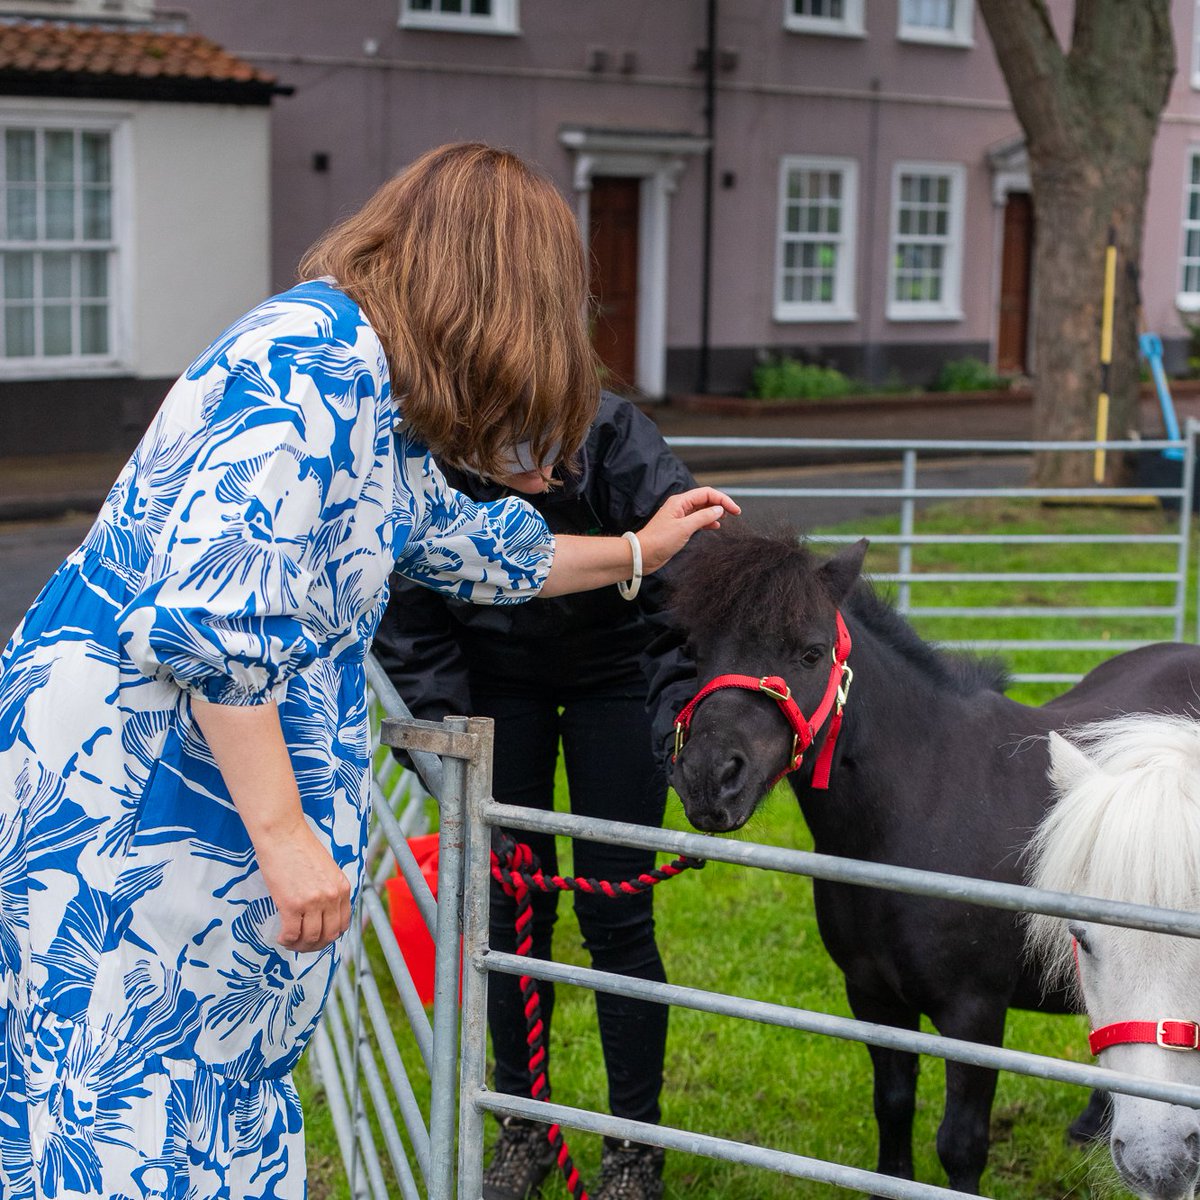 We were delighted to welcome Her Majesty The Queen to Norfolk today.

Dr Hilary Emmett of @AmericanStudies met The Queen at @RedwingsHS Anna Sewell House Great Yarmouth to present our @UEApublishing edition of Black Beauty.